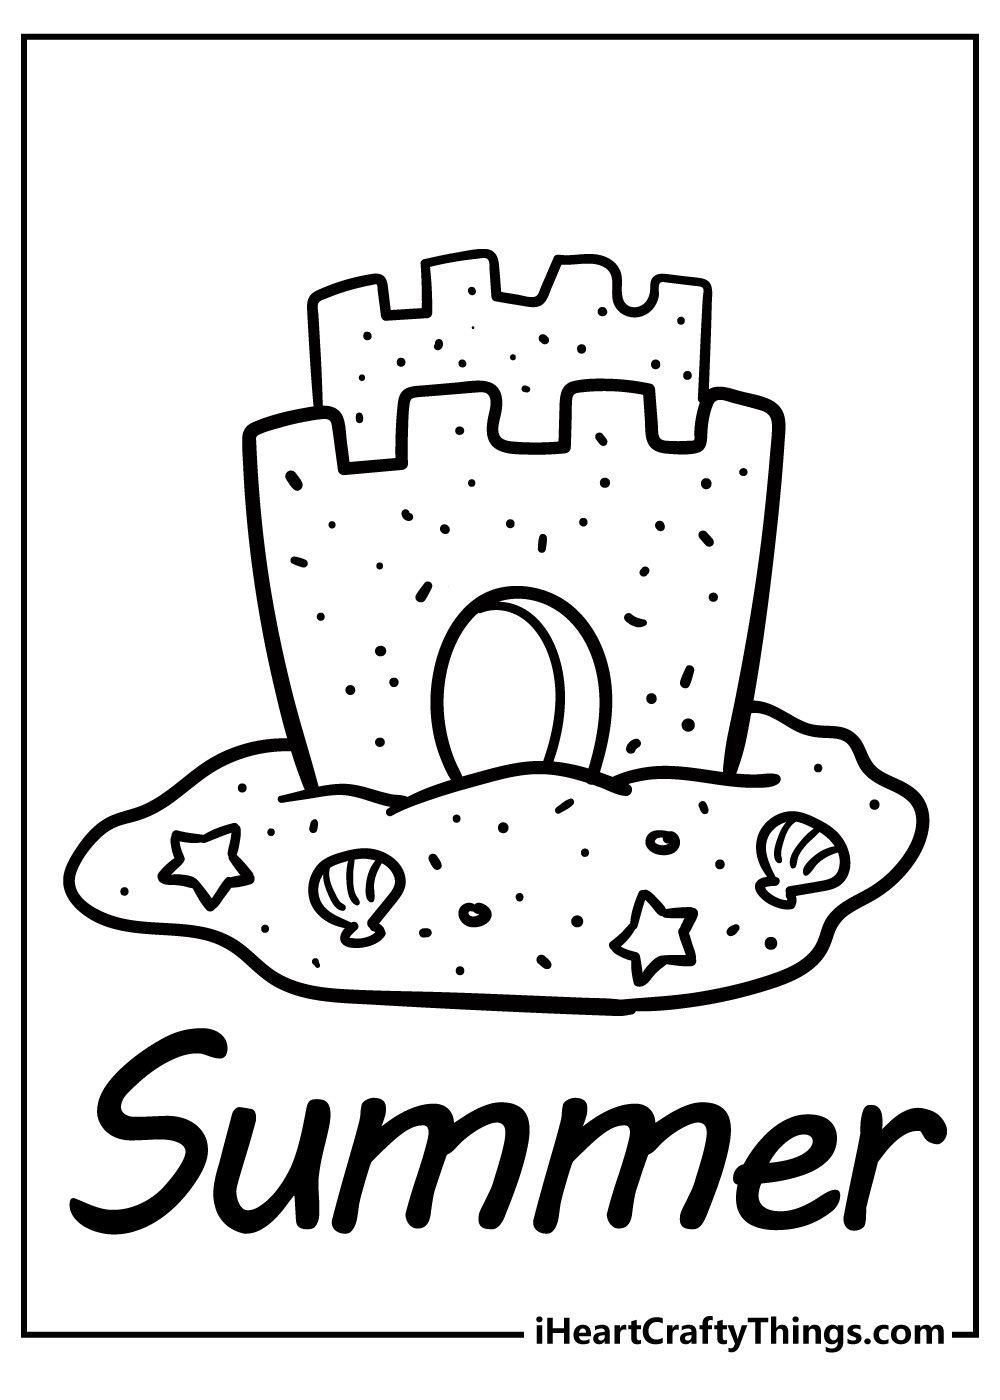 Summer Coloring Pages free pdf download